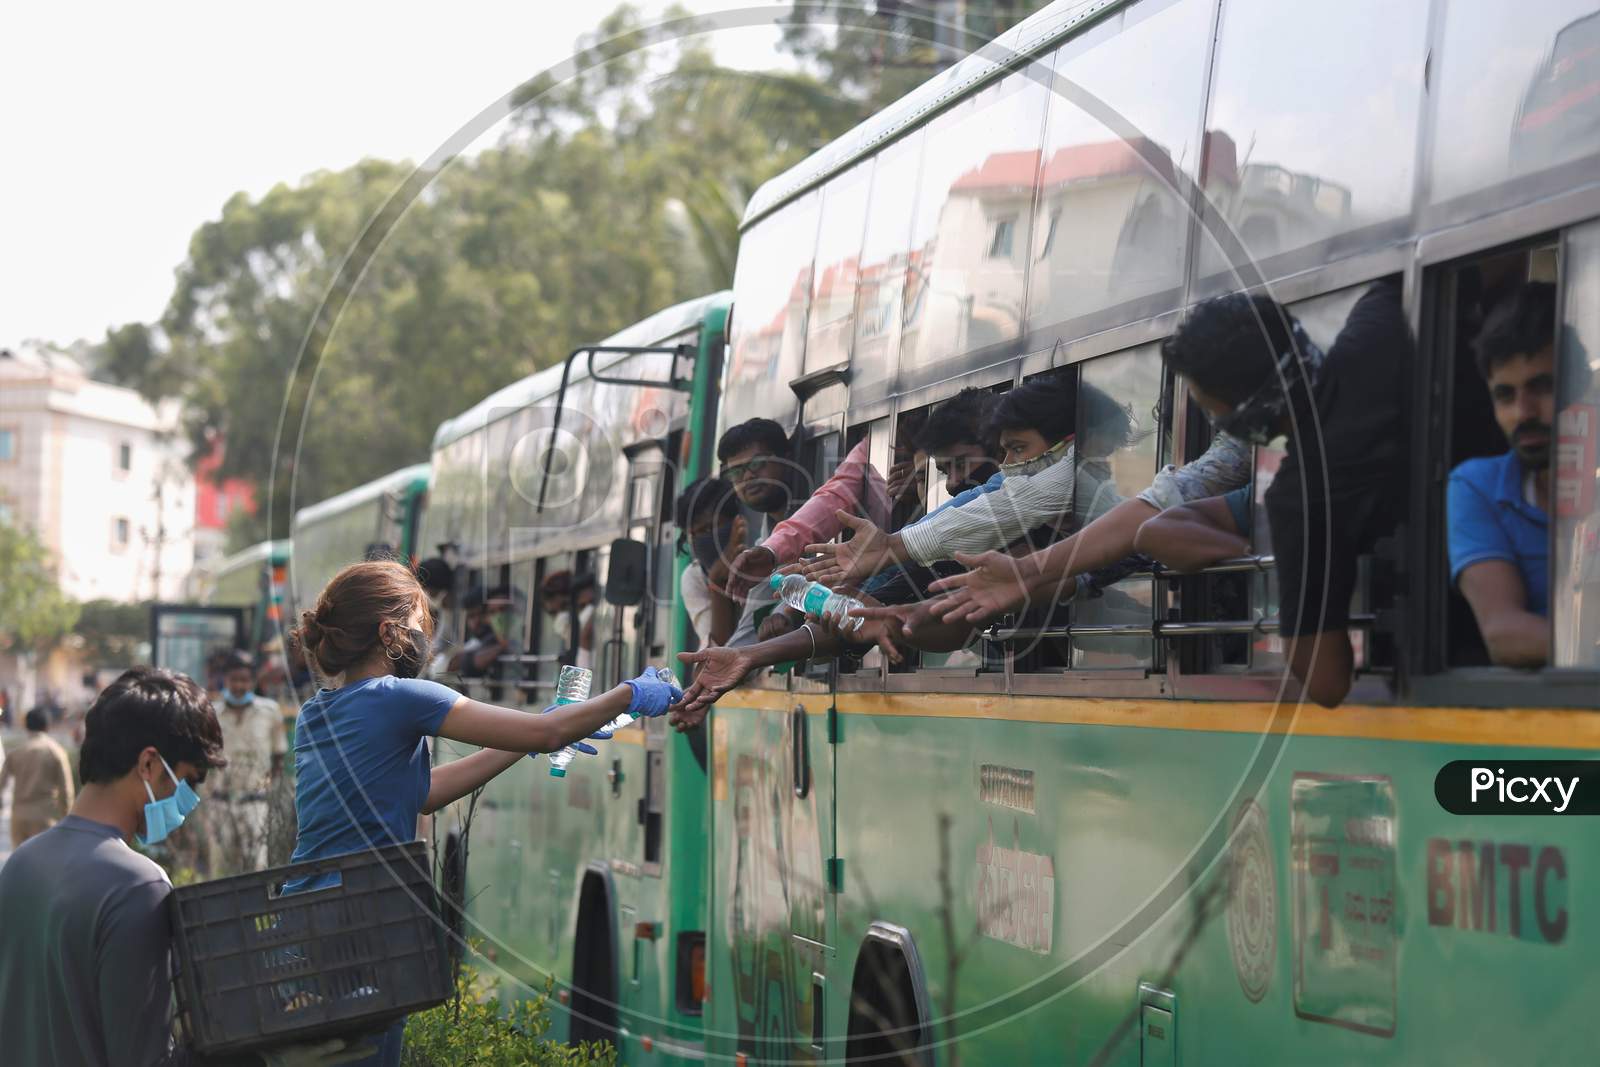 A woman provides bottles of drinking water to men inside a bus as they wait to alight to board a special train arranged by the government to repatriate migrant workers from the Chikkabanavara Junction Railway Station on the outskirts of Bangalore, India.